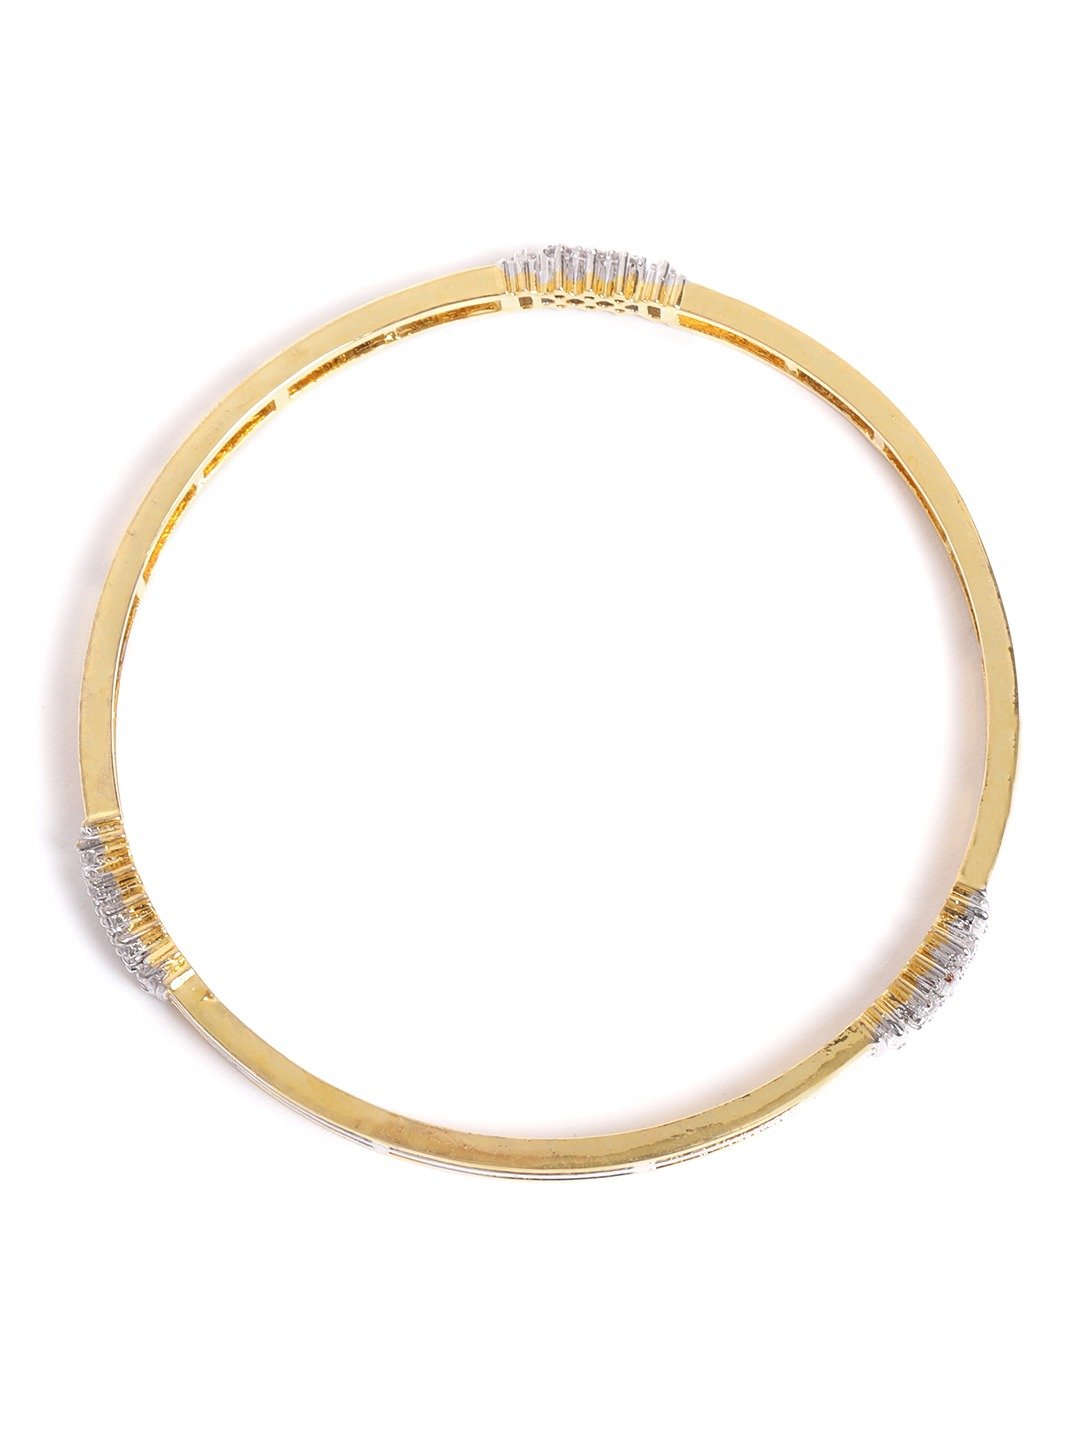 Women's Set of 2 Gold and Silver Plated American Diamond Studded Bangles - Priyaasi